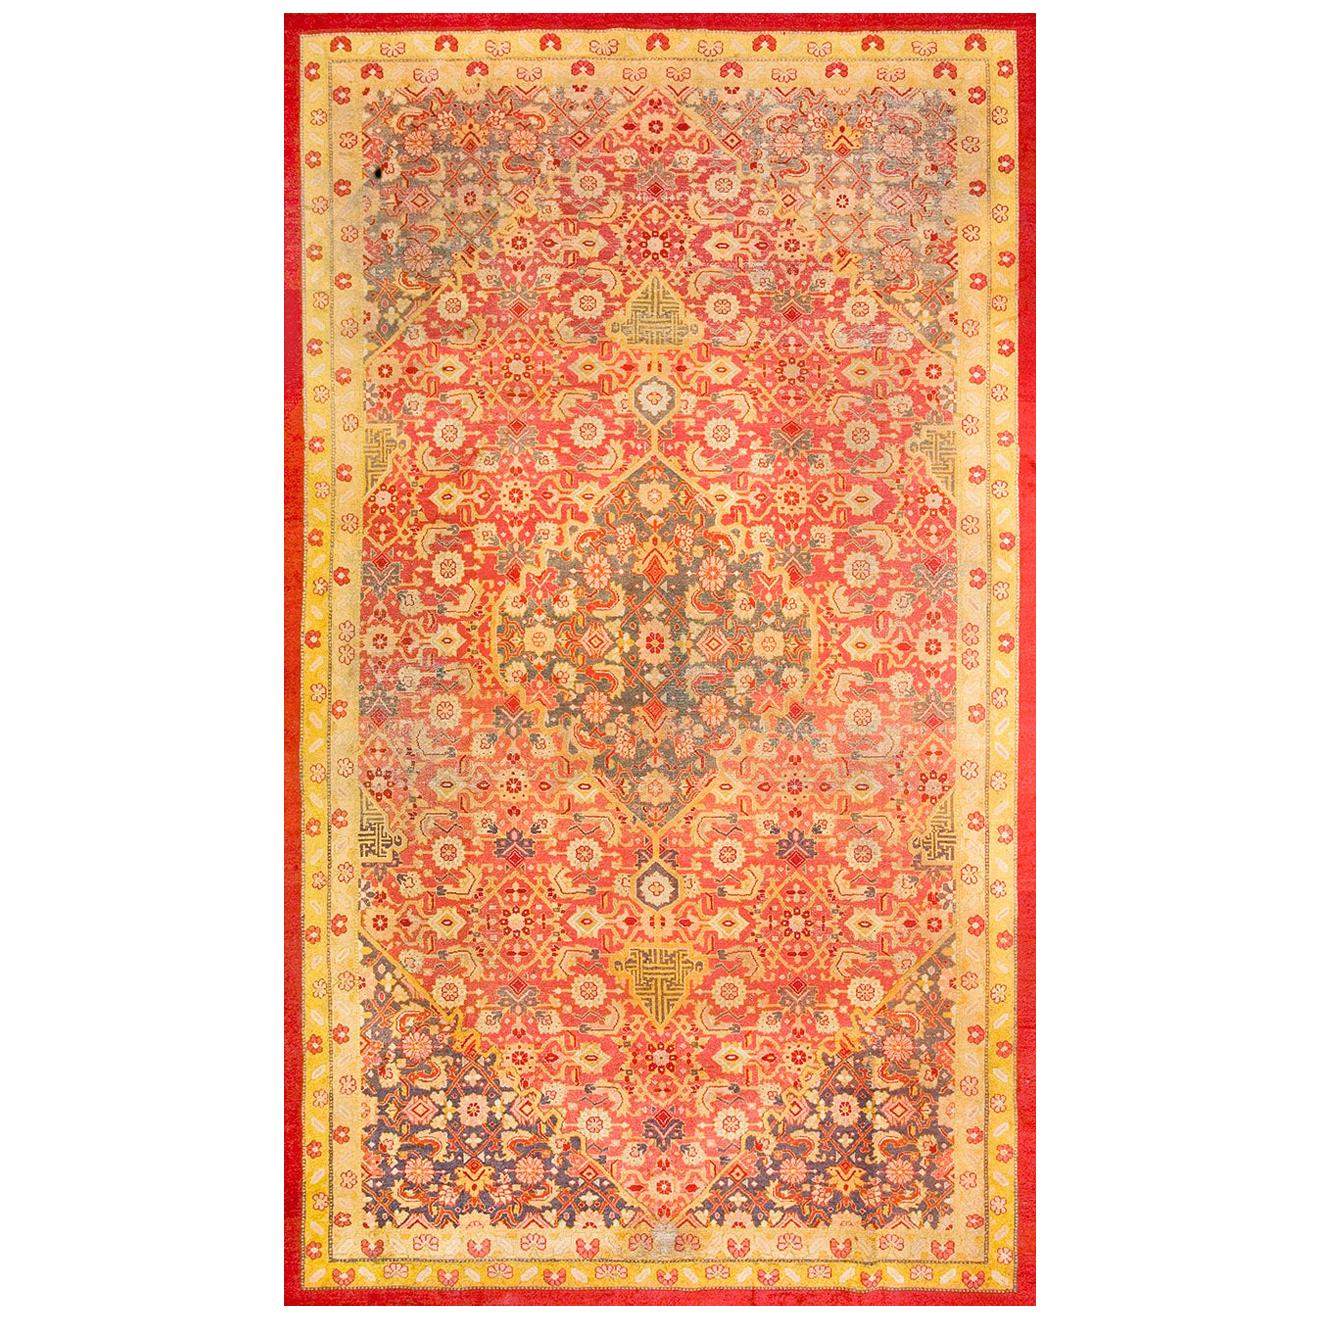 Early 20th Century N. Indian Amritsar Carpet ( 9'6" x 16'3" - 290 x 495 ) For Sale